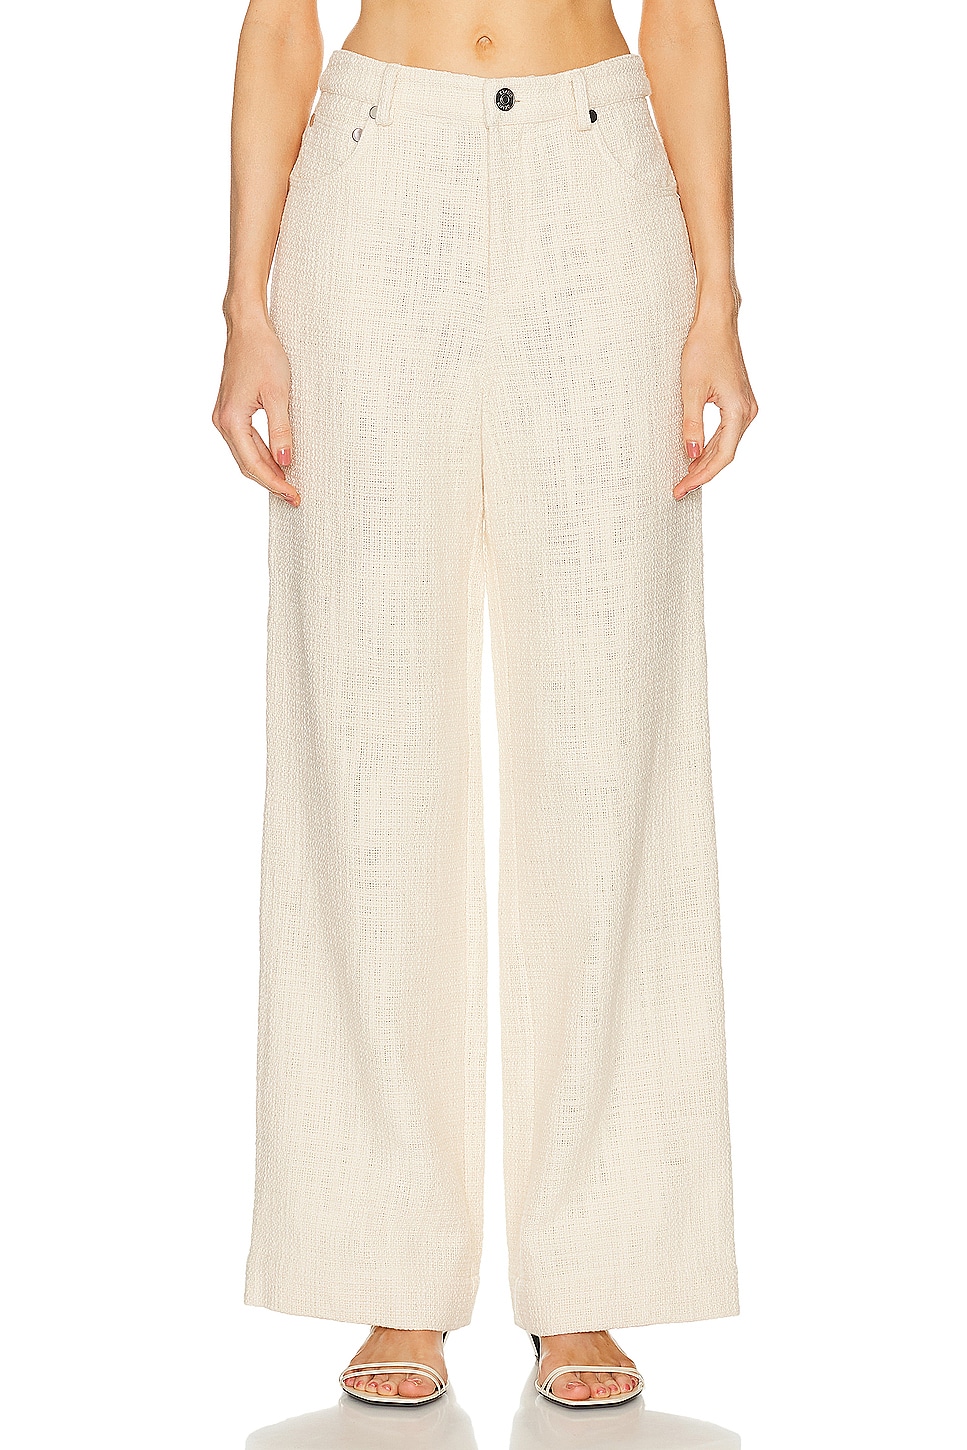 Image 1 of Staud Grayson Pant in Ivory